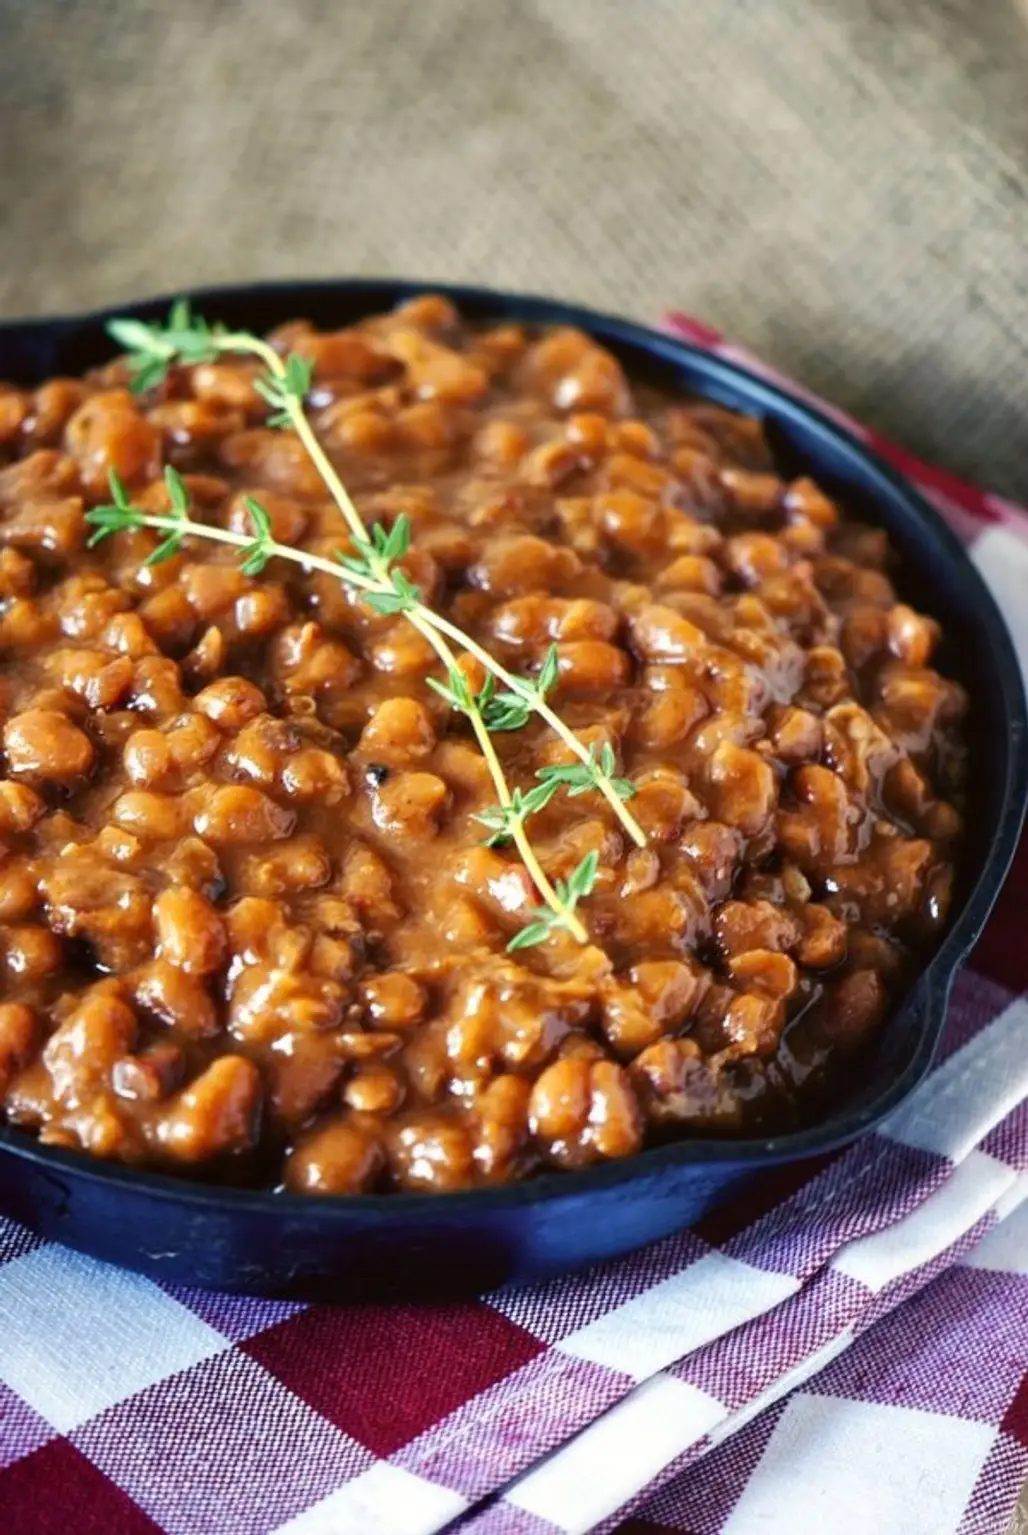 Slow Cooker Barbecue Beans Are Great for a Backyard Picnic